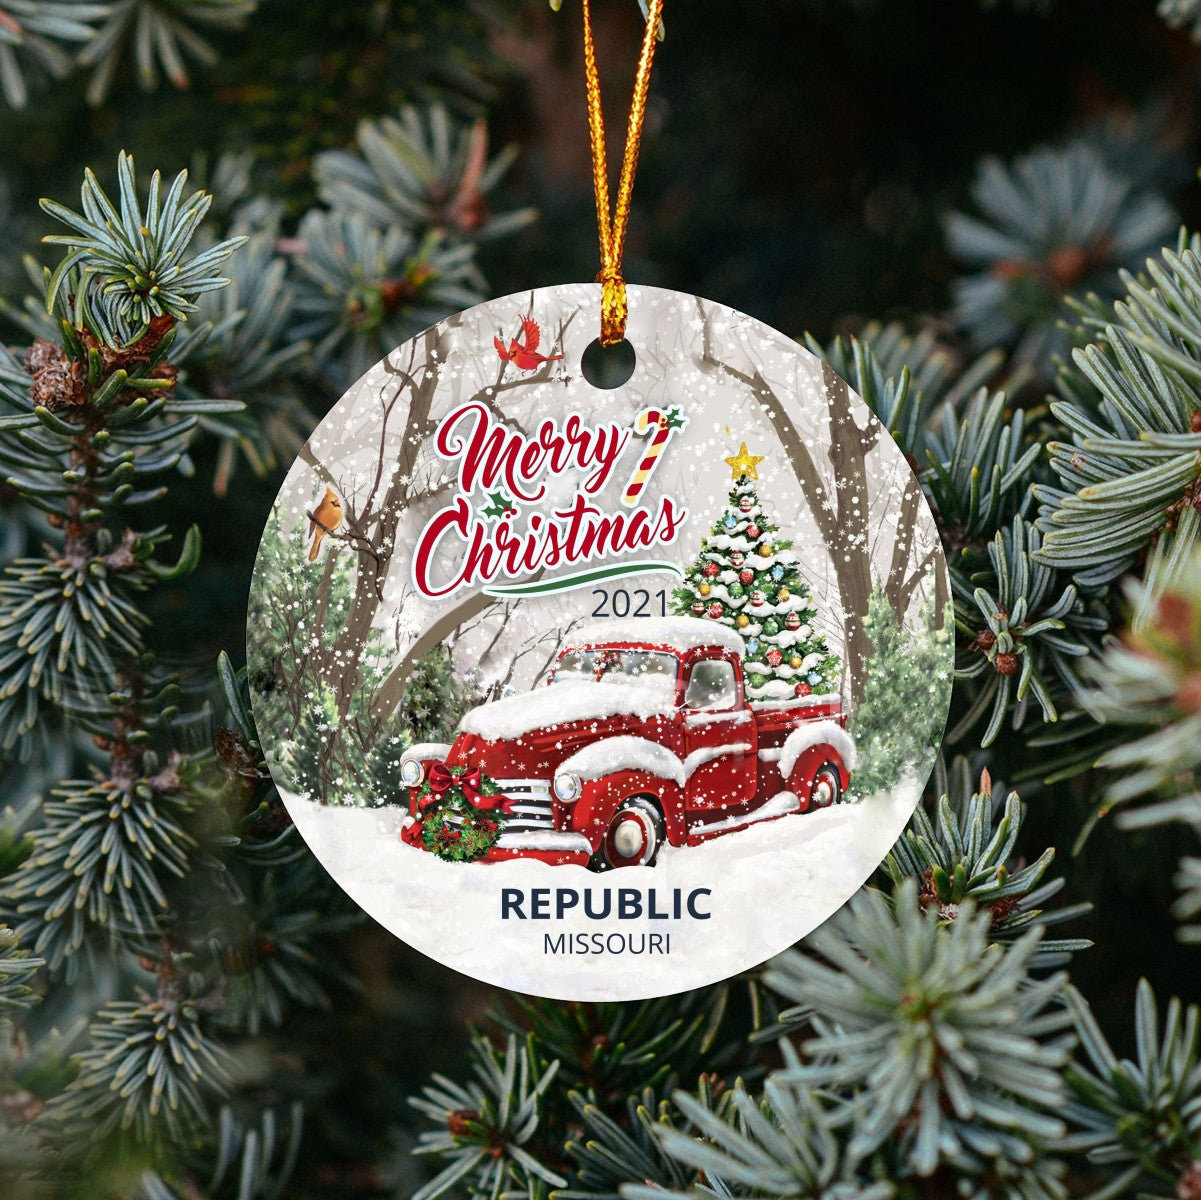 Christmas Tree Ornaments Republic - Ornament With Name City, State Republic Missouri MO Ornament - Red Truck Xmas Ornaments 3'' Plastic Gift For Family, Friend And Housewarming